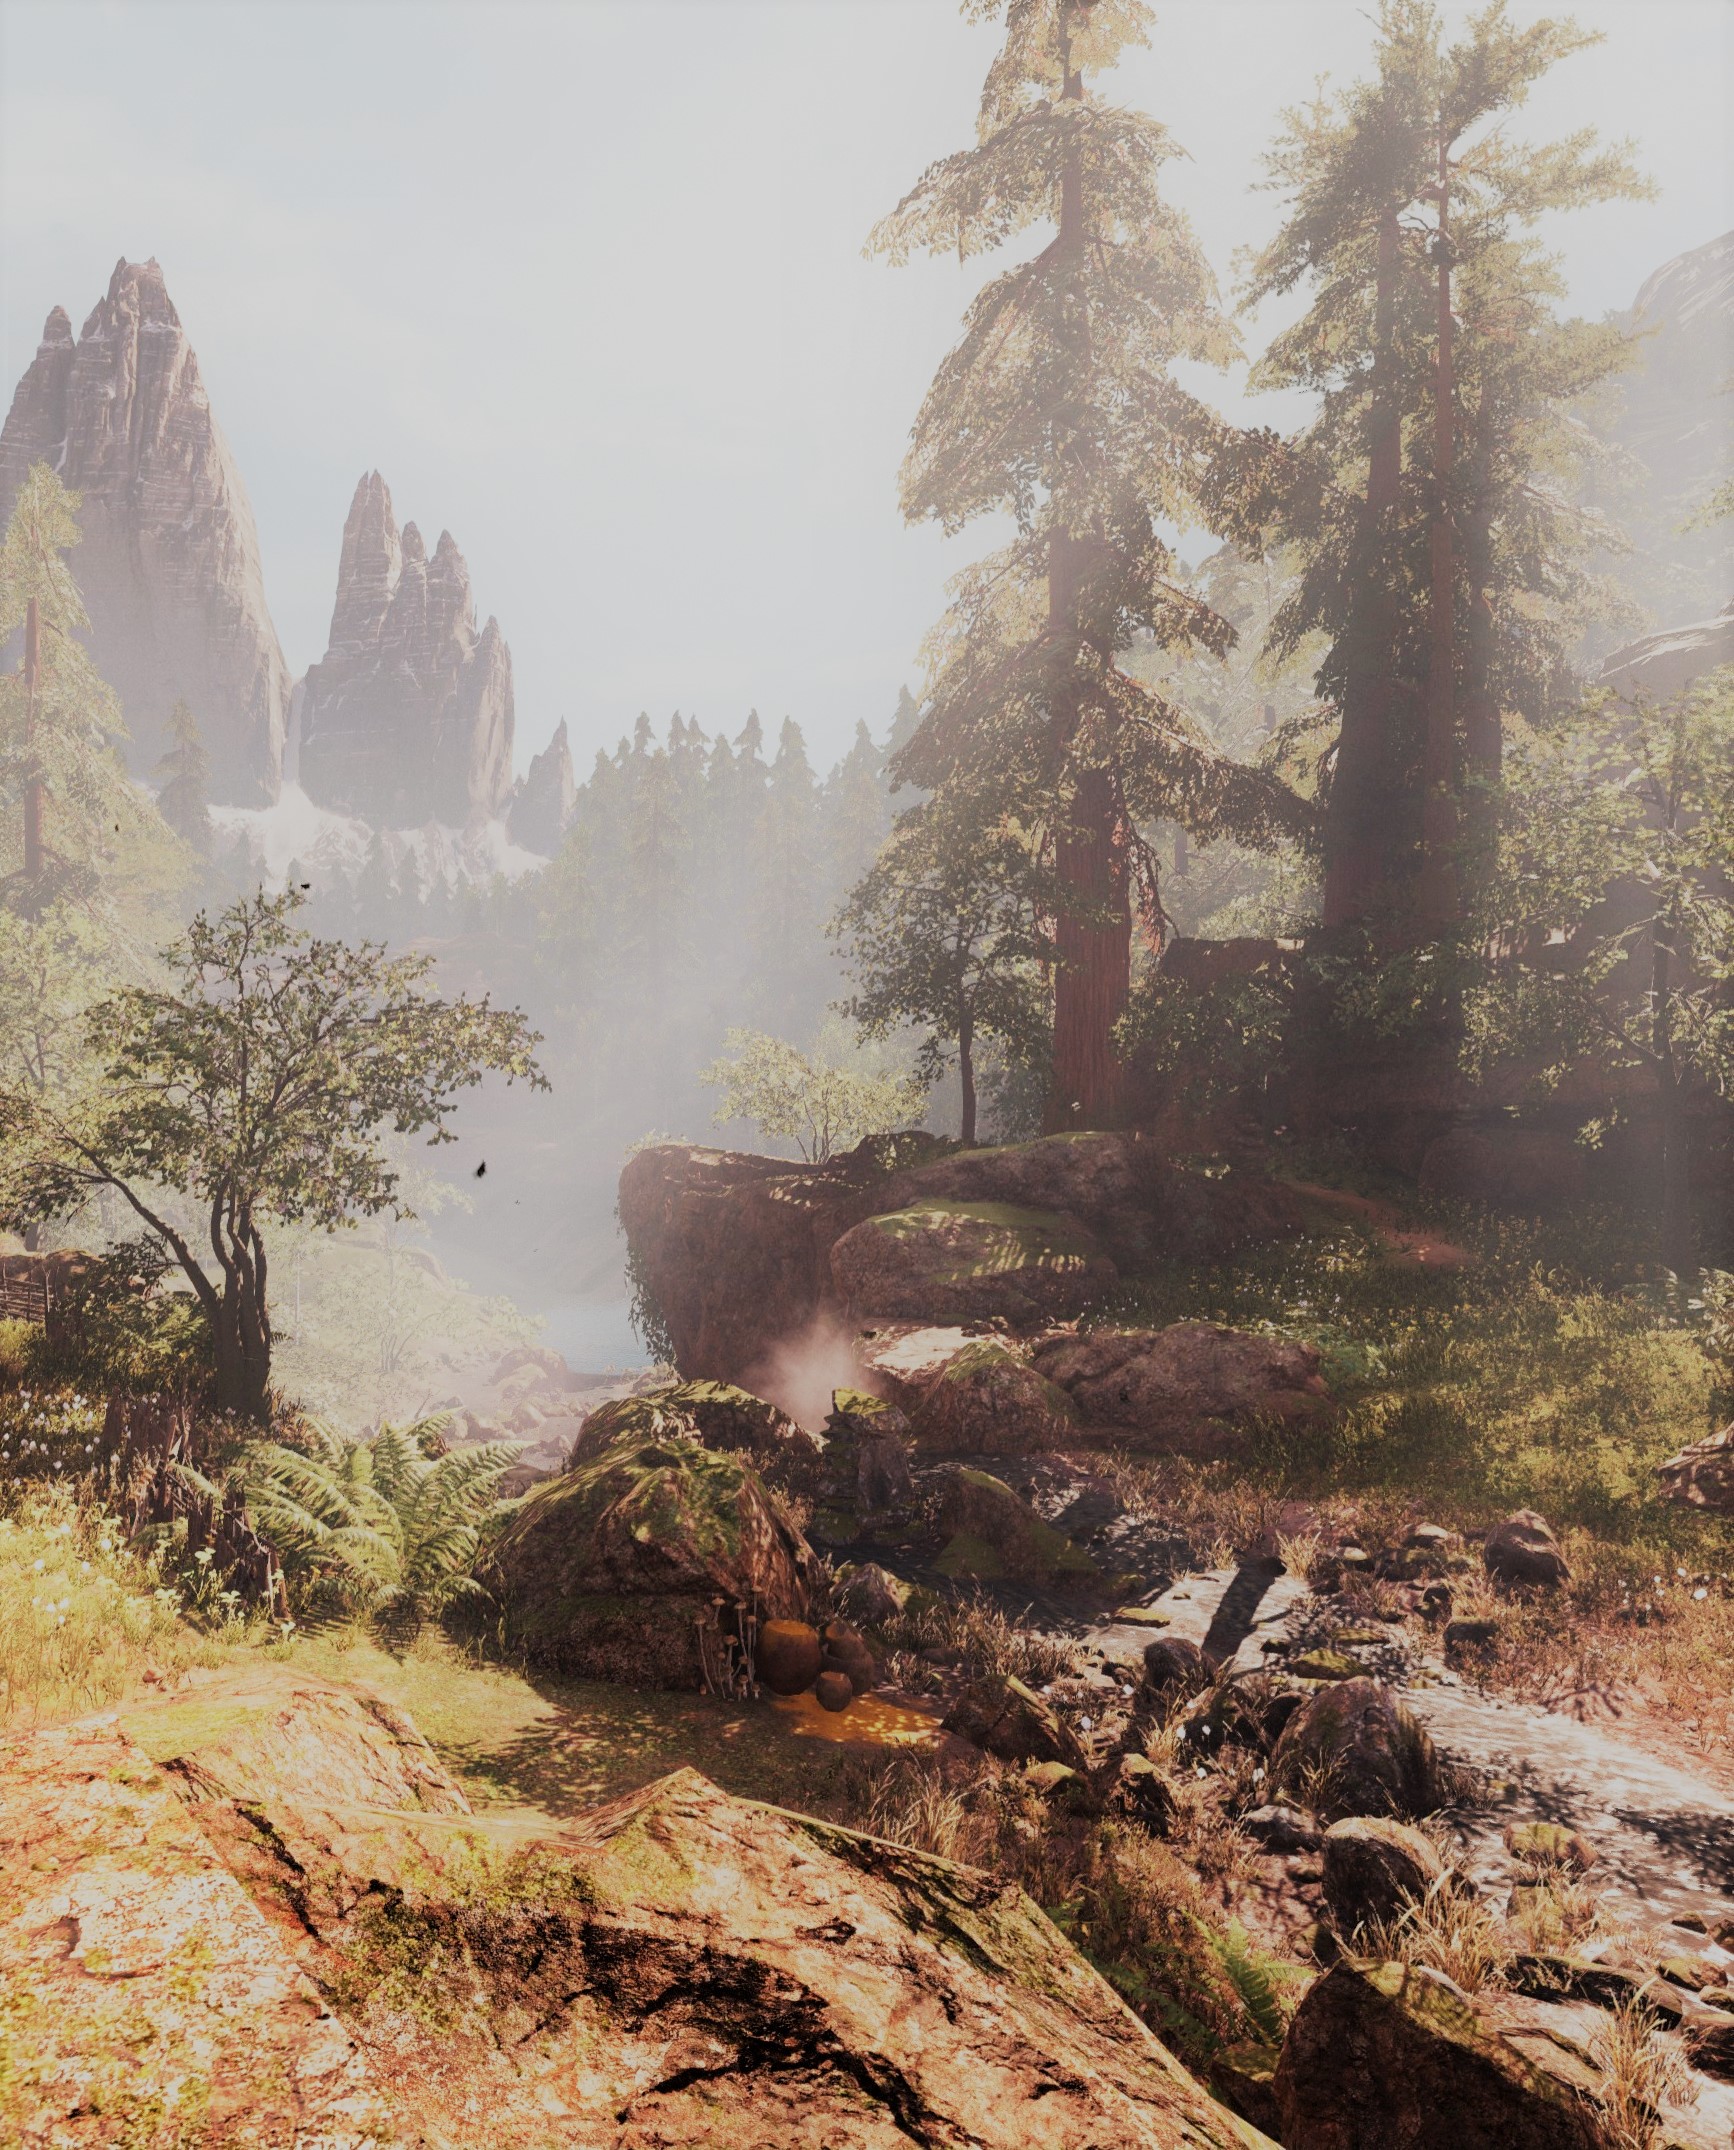 free download far cry primal steam